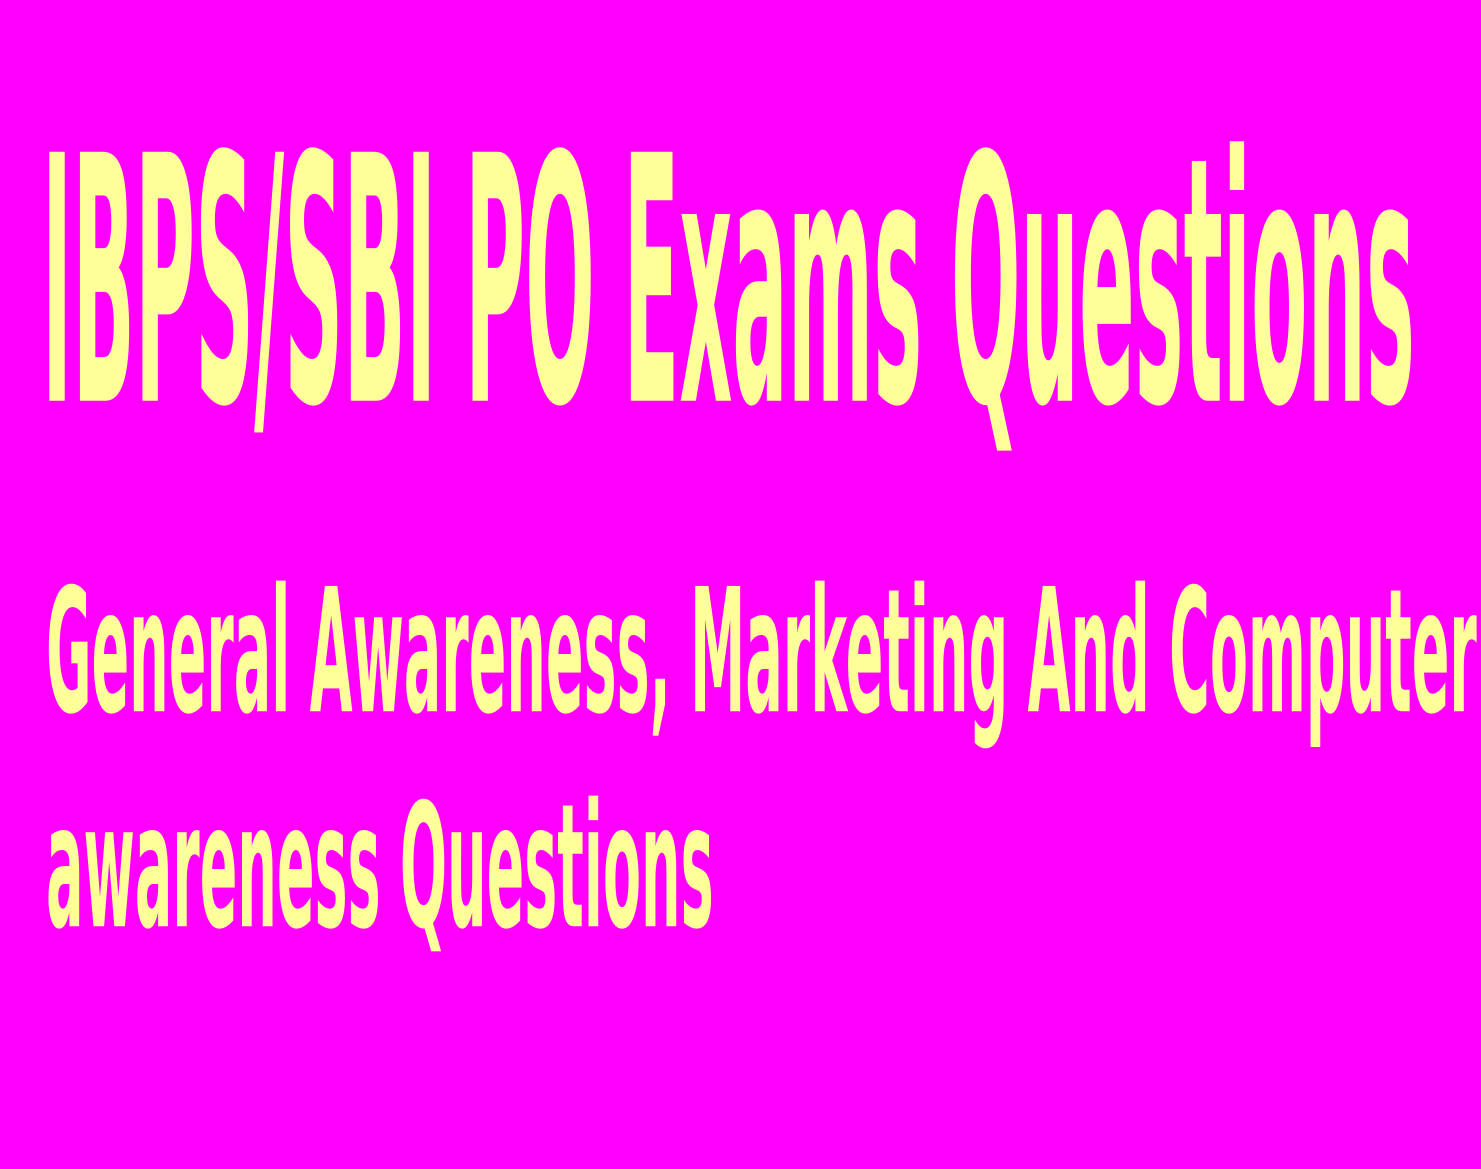 General Awareness, Marketing And Computer awareness Questions For IBPS OR SBI PO Exams